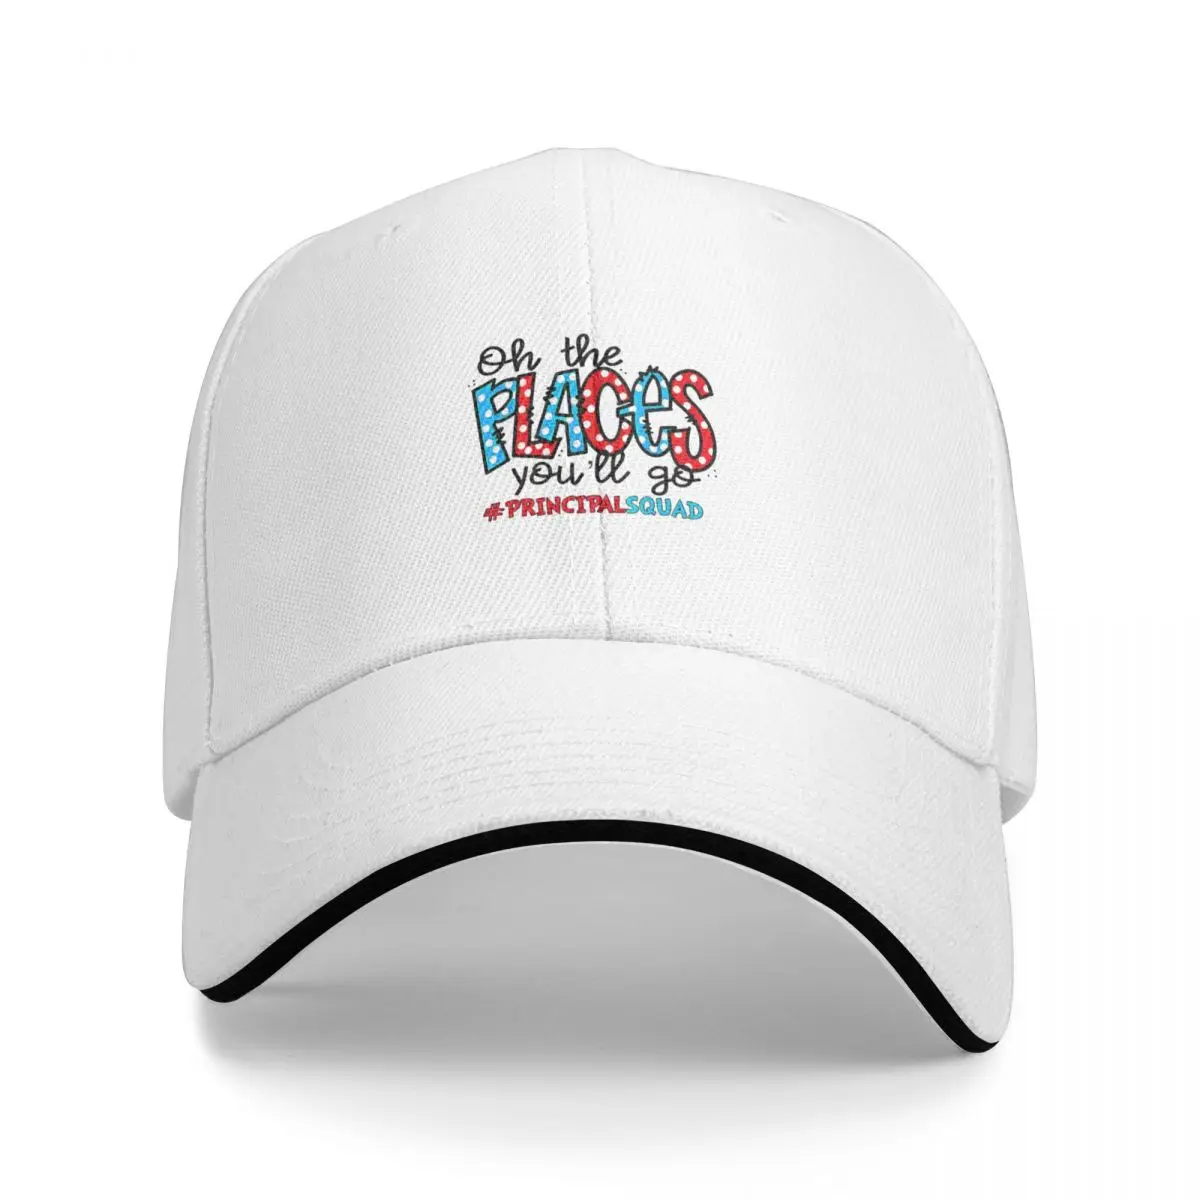 

Oh The Places You'll Go Baseball Caps Snapback Fashion Baseball Hats Breathable Casual Outdoor Unisex Polychromatic Customizable